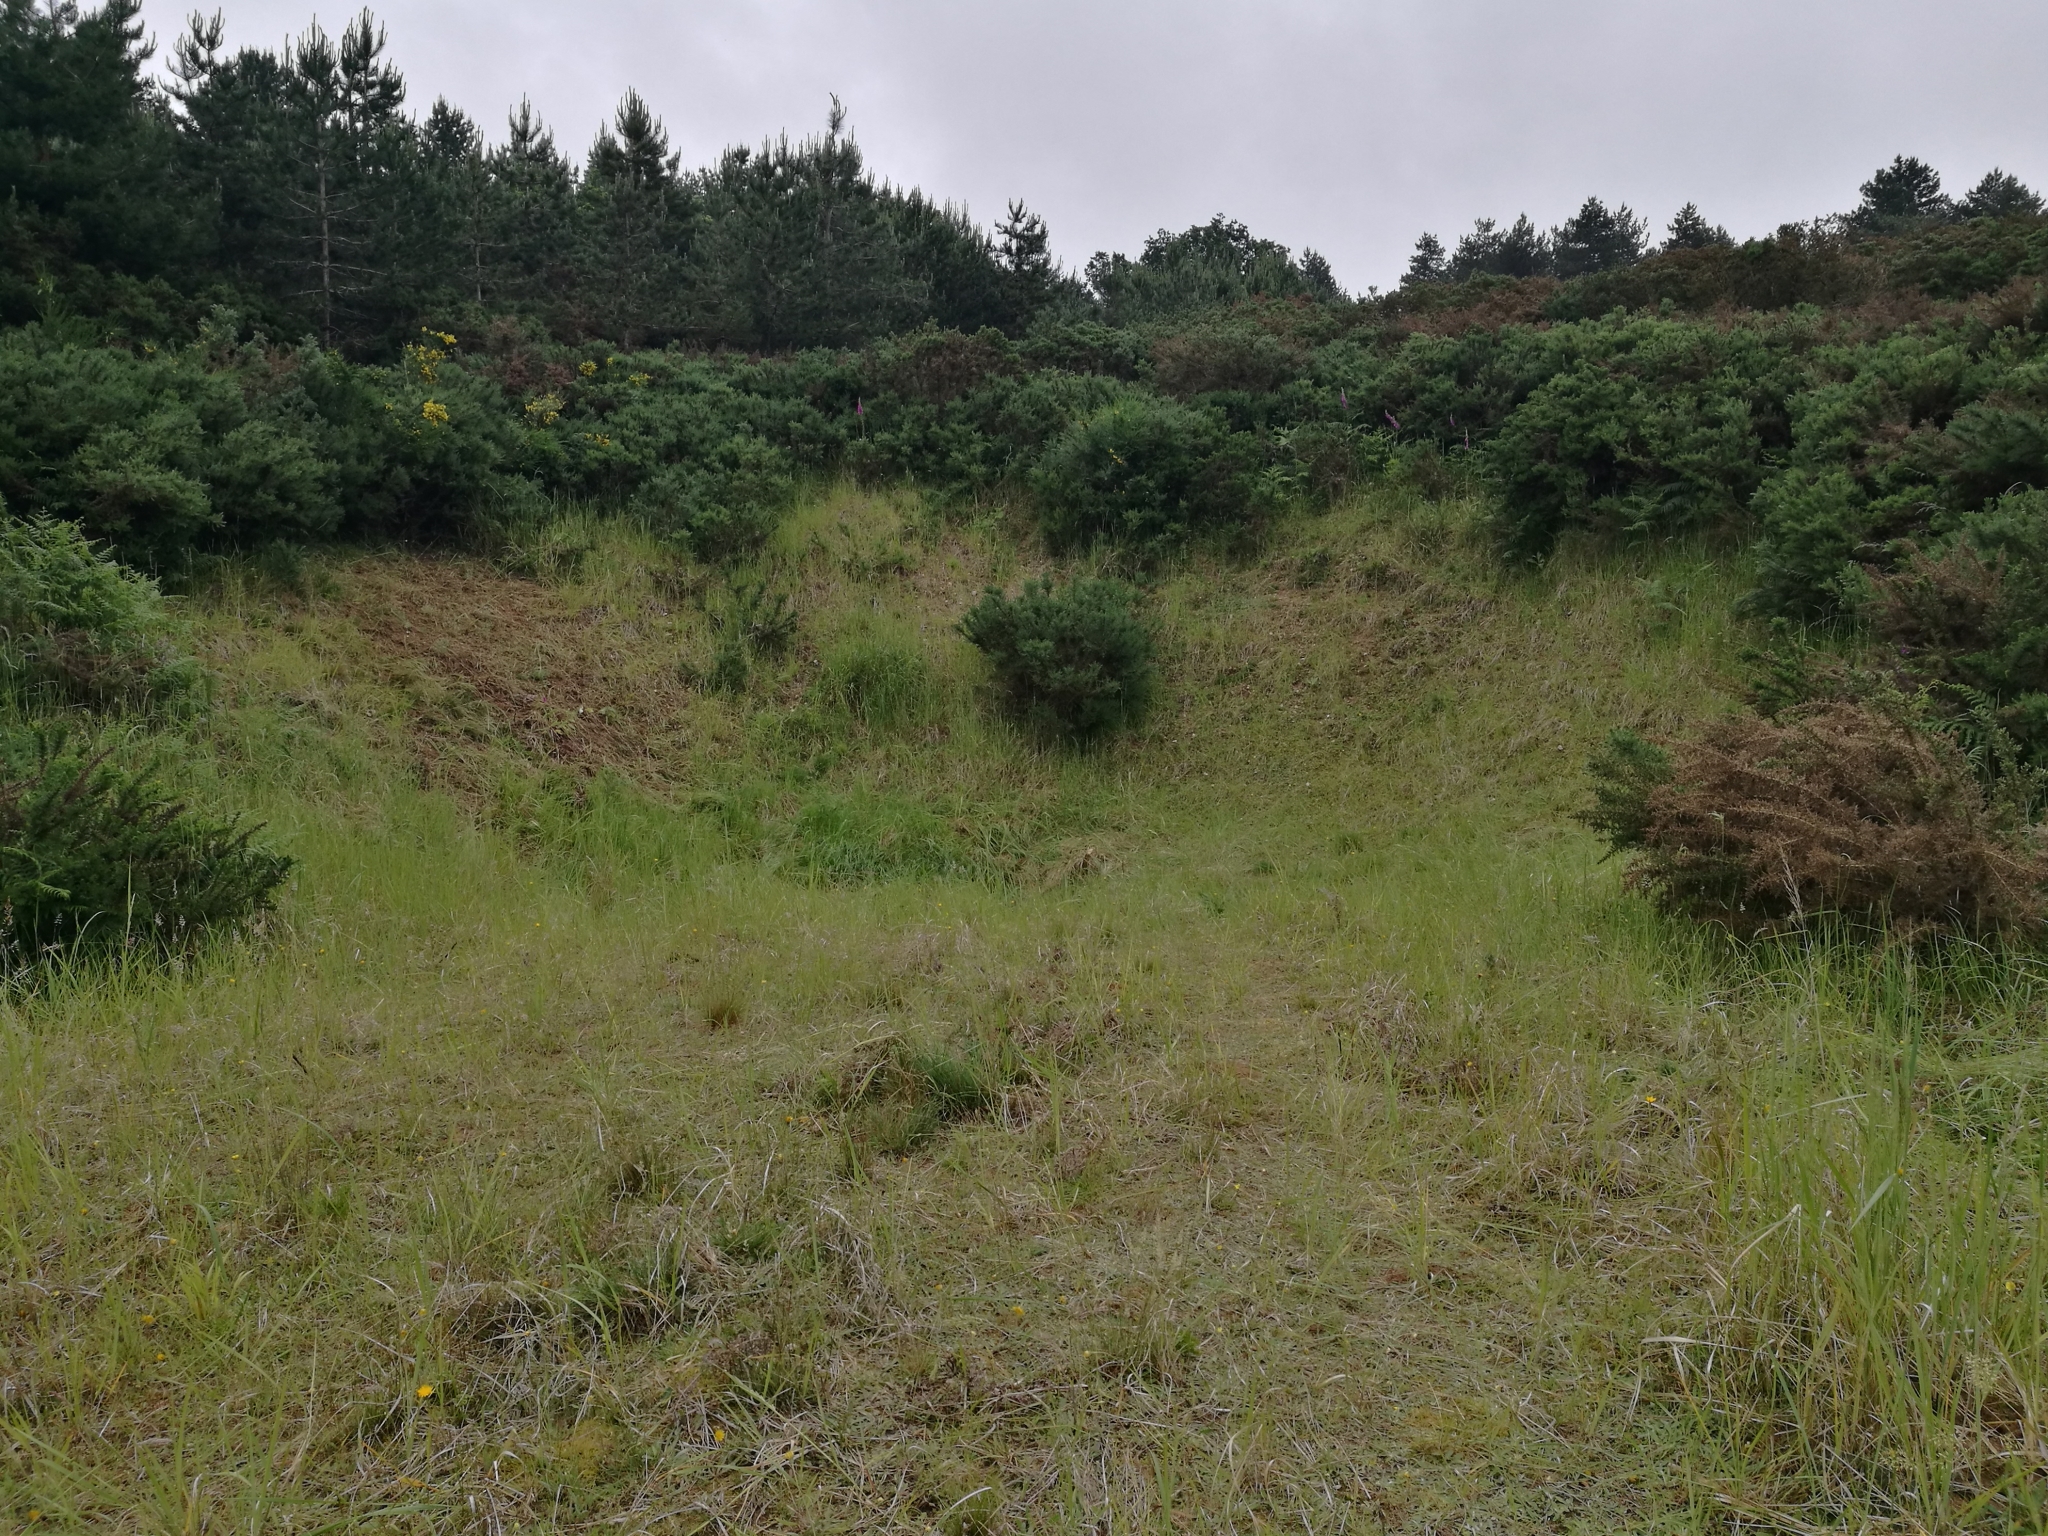 A photo from the FoTF Conservation Event - June 2021 - Brash Clearance at Mildenhall Mugwort Pit : A shot of one of the slopes of Mildenhall Mugwort Pit